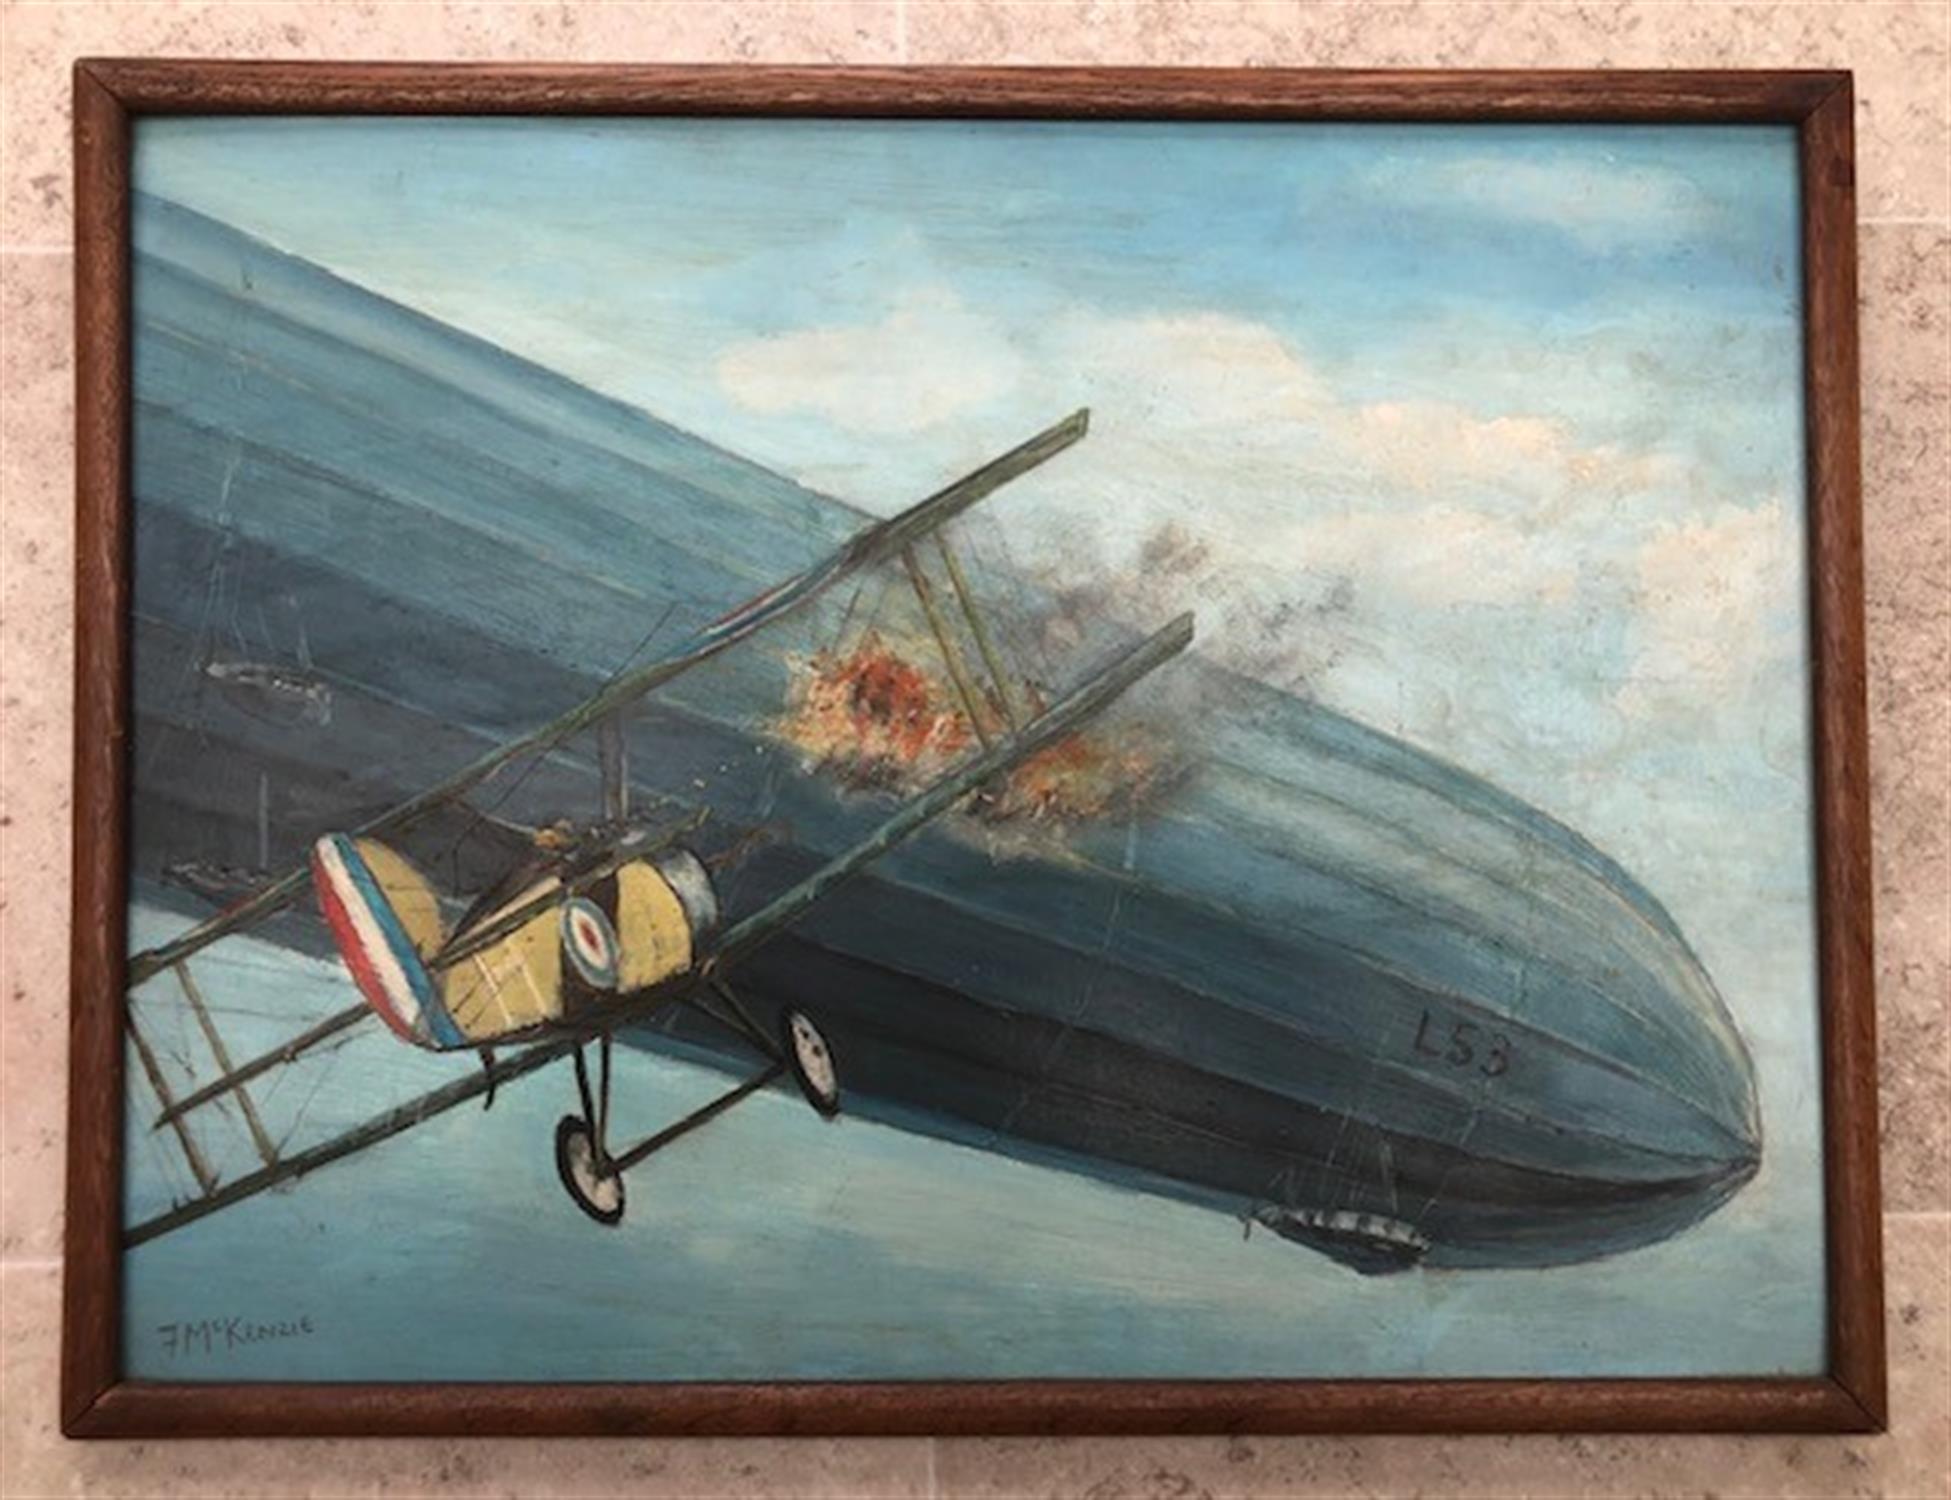 Sopwith Camel biplane attacking the WWI Zeppelin Airship L53.